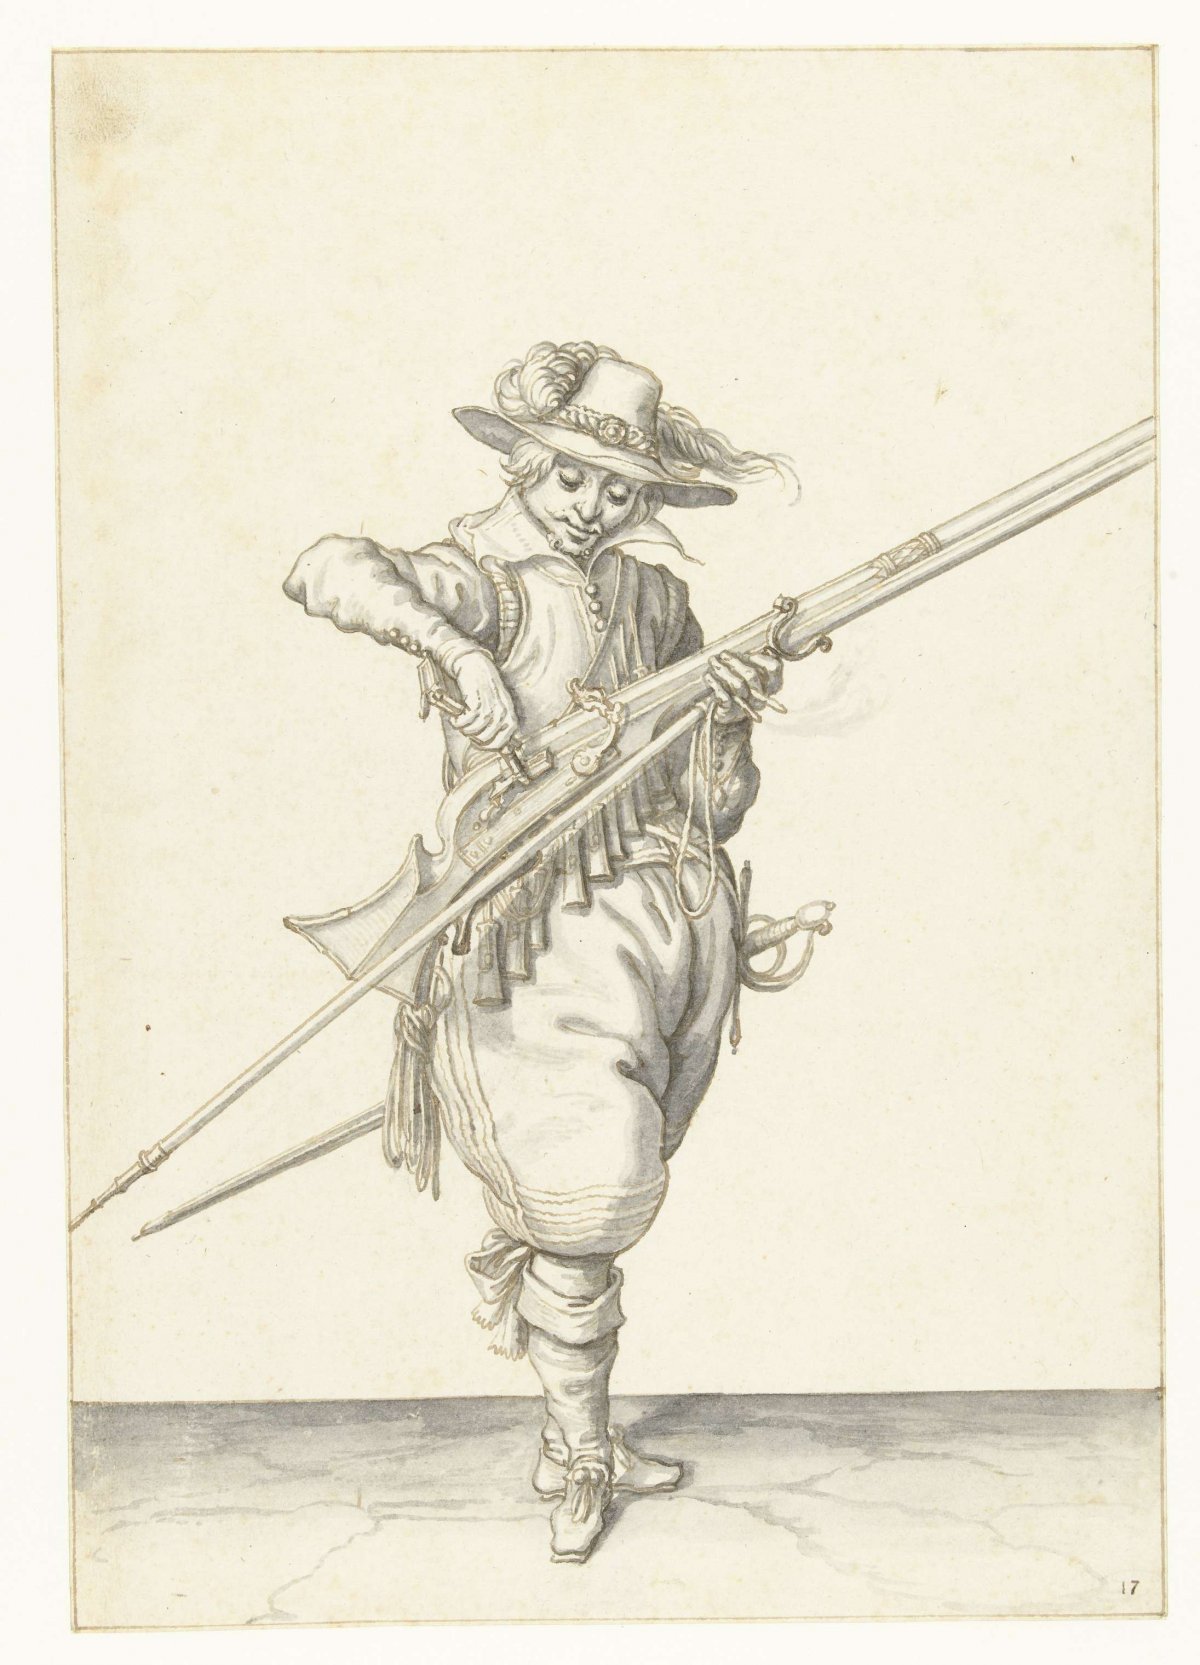 Soldier pouring gunpowder into the pan of his musket, Jacques de Gheyn (II), 1596 - 1606